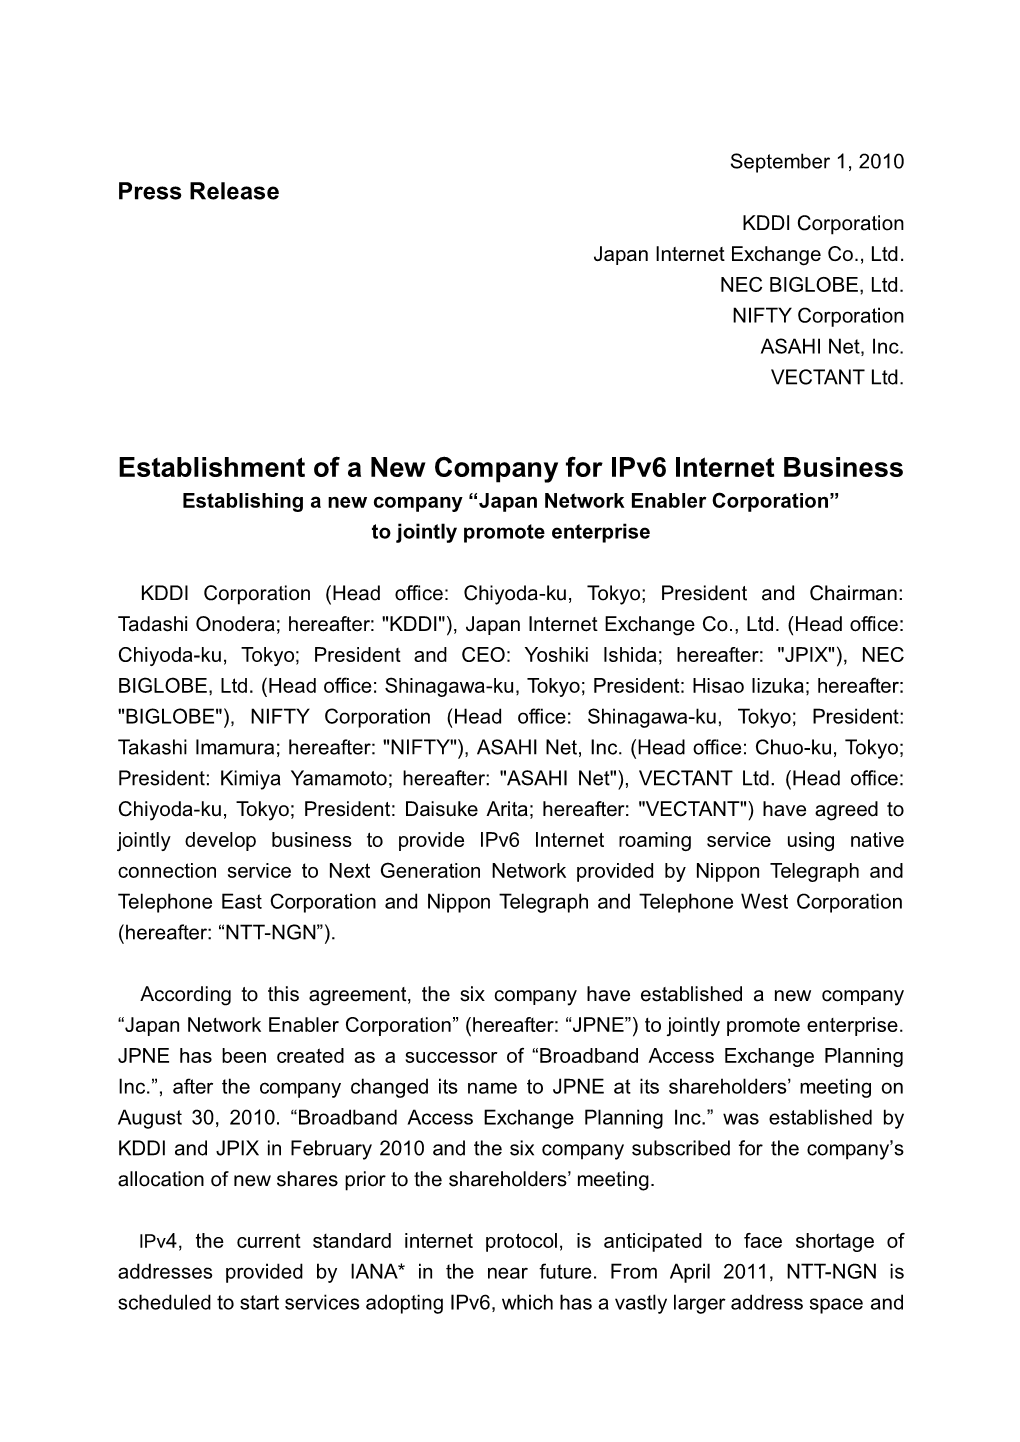 Establishment of a New Company for Ipv6 Internet Business Establishing a New Company “Japan Network Enabler Corporation” to Jointly Promote Enterprise